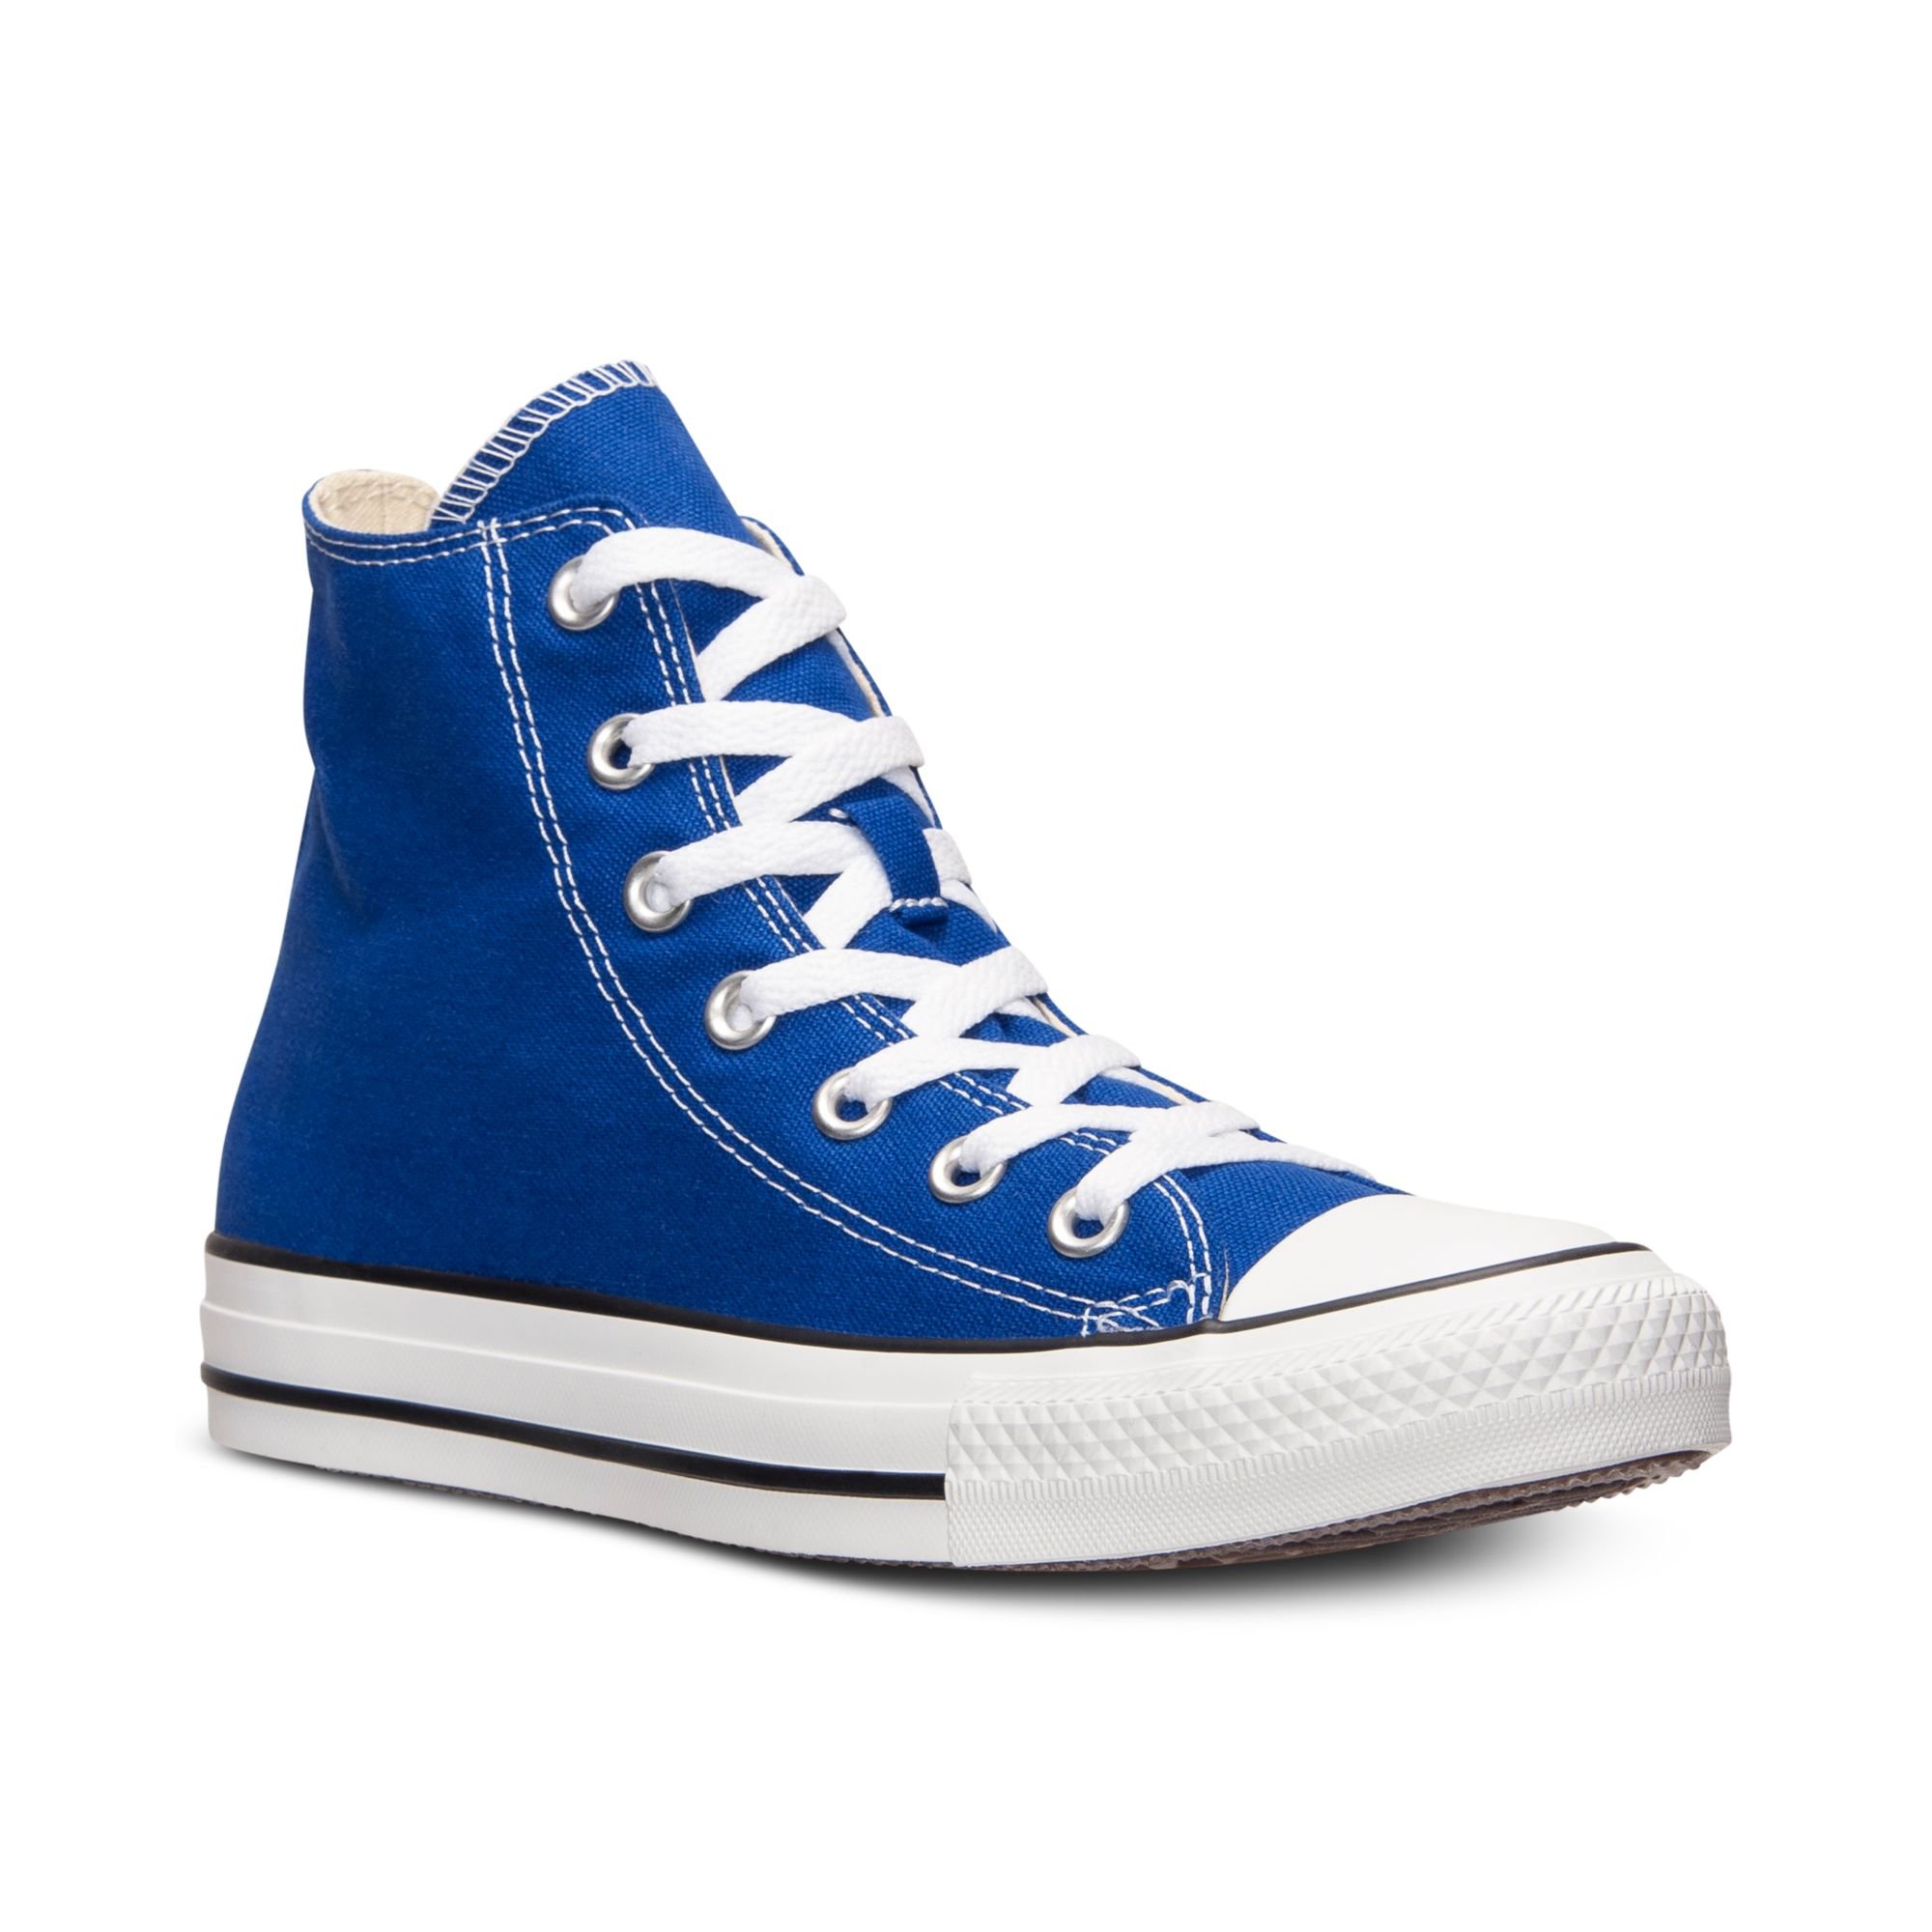 converse-mens-chuck-taylor-high-top-casual-sneakers-from-finish-line-in-blue-for-men-radio-blue